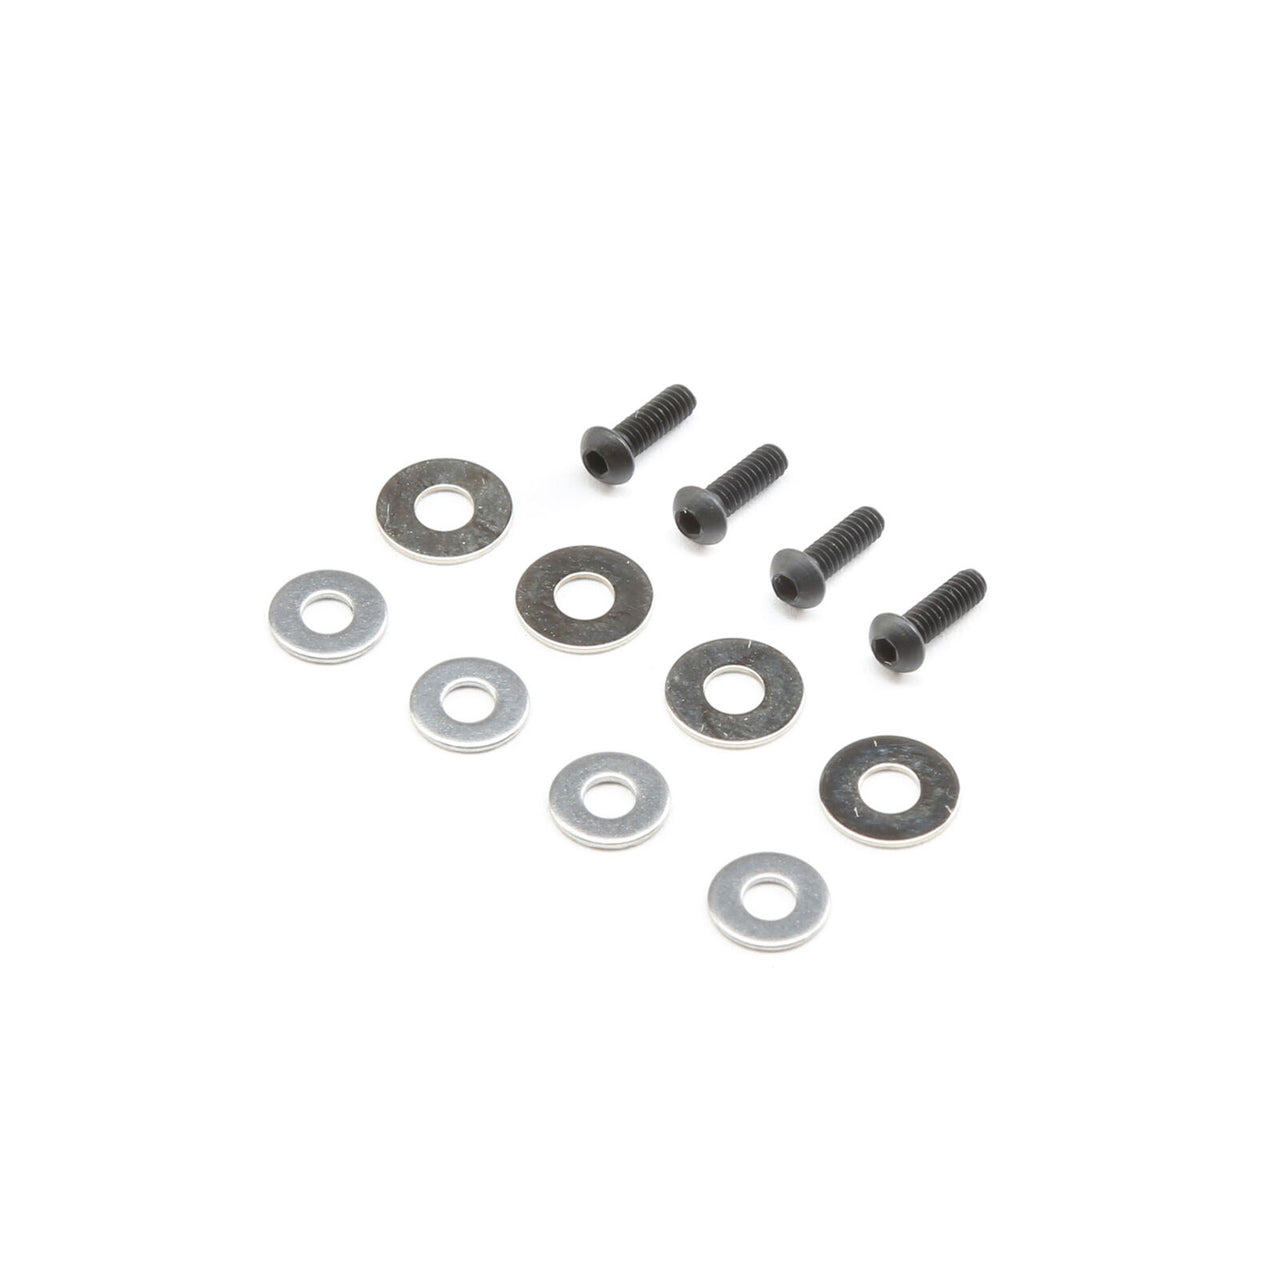 TLR243046 Shock Washer Screw (4): 8X, 8XE